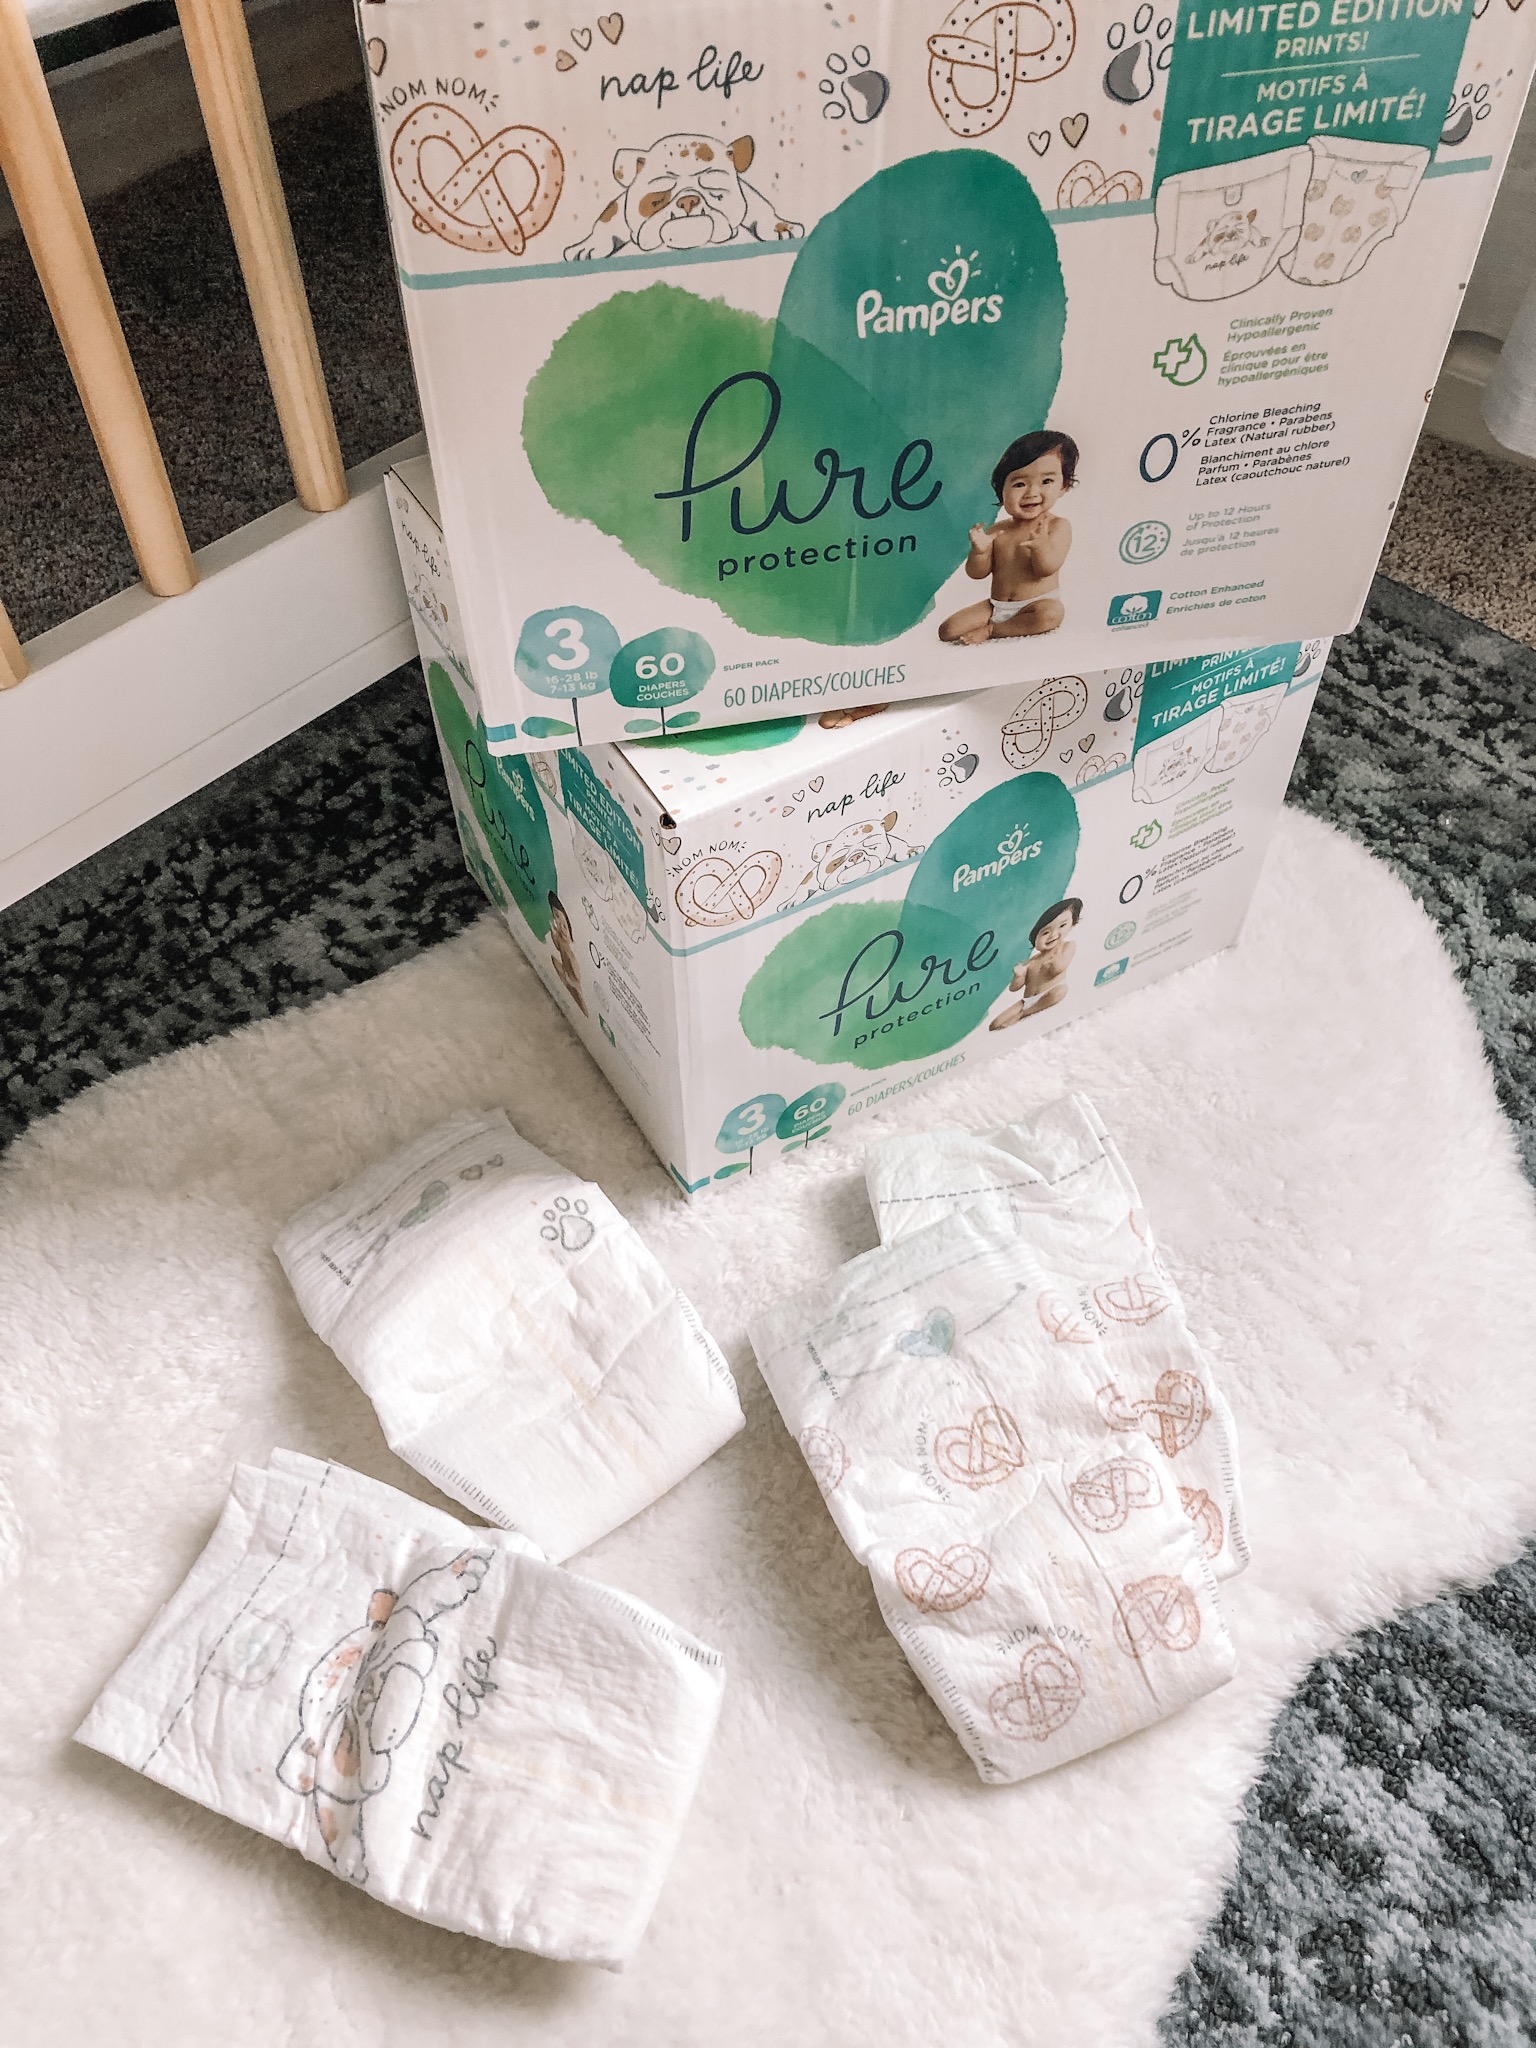 Pampers Pure Protection Diapers Review: Great for Sensitive Skin